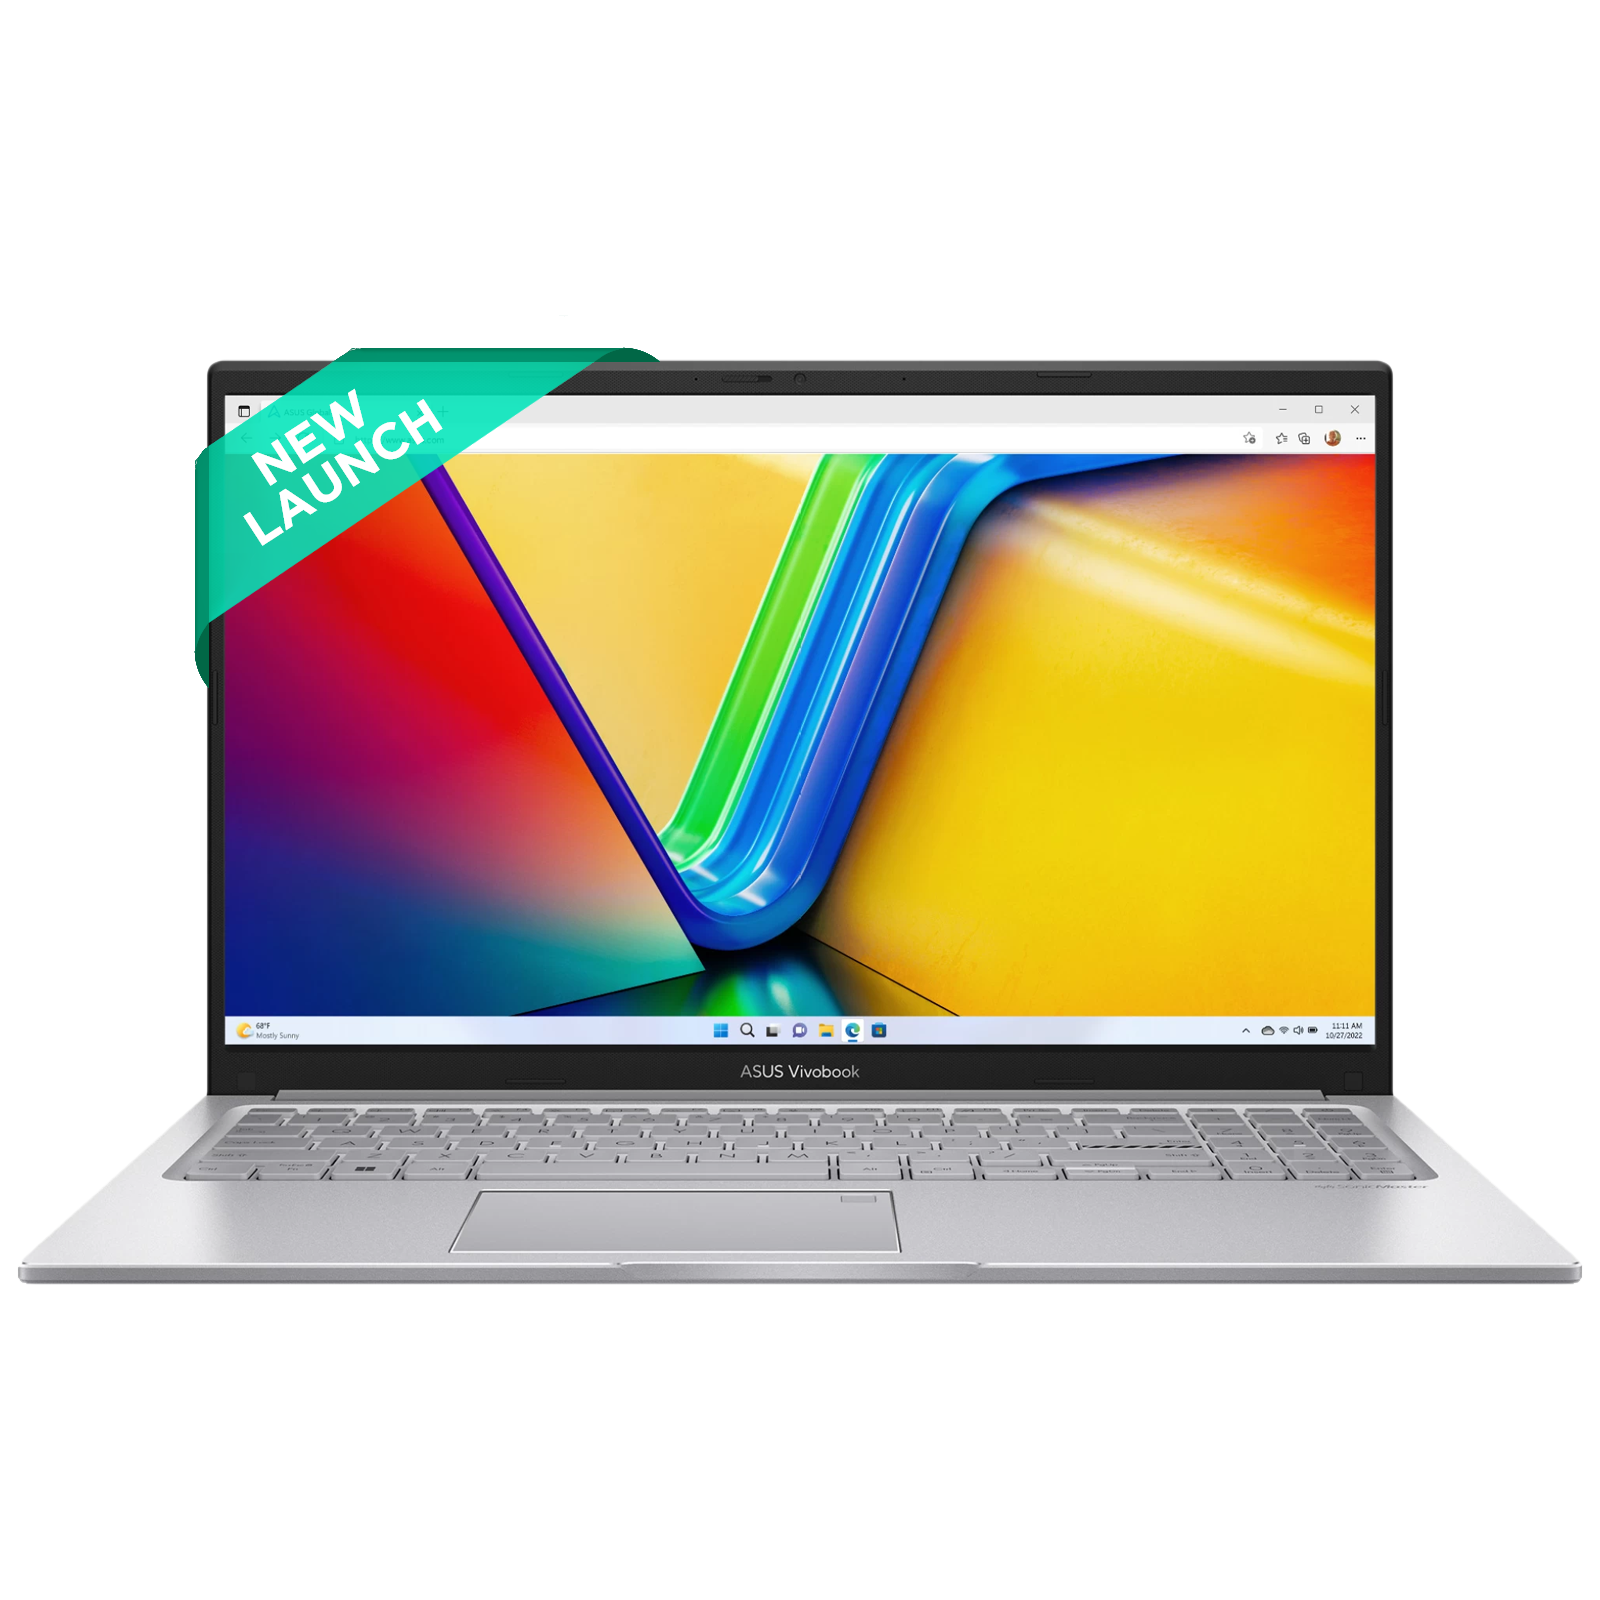 ASUS Vivobook 15 Intel Core i5 12th Gen Thin & Light Laptop (8GB, 512GB SSD, Windows 11 Home, 15.6 inch Full HD LED-Backlit Display, MS Office 2021, Cool Silver, 1.70 KG)